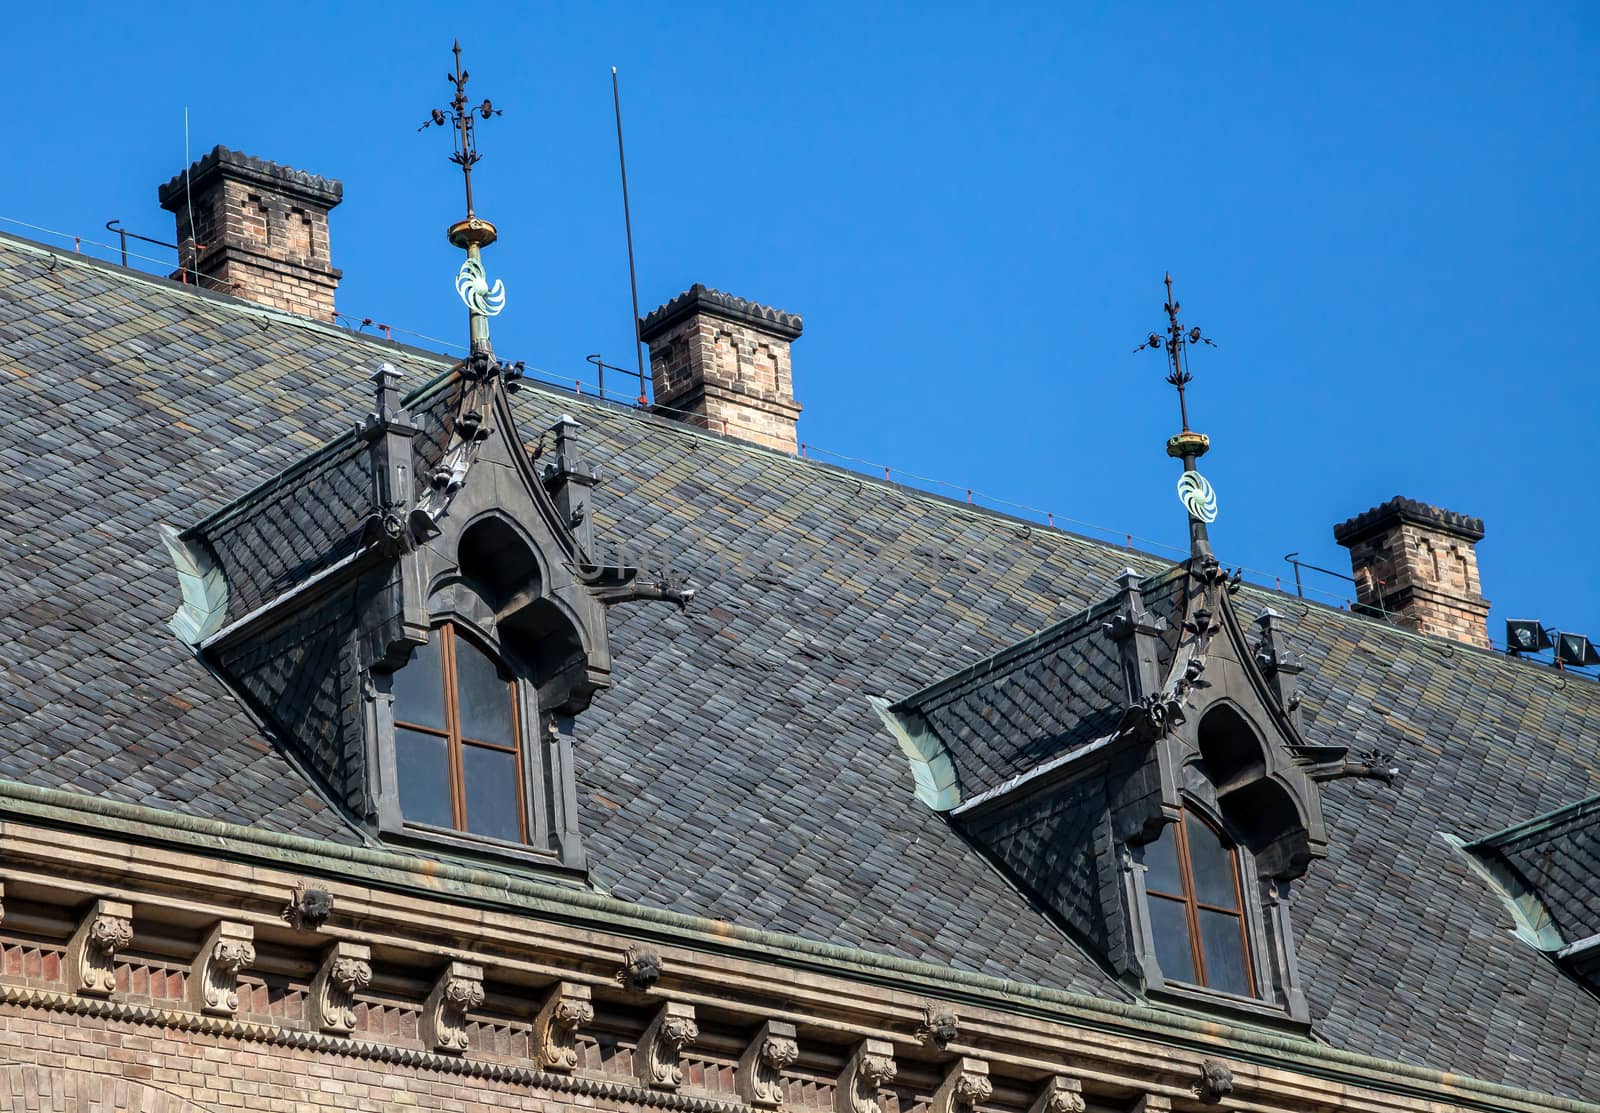 Dormer windows on the roof of gothic building in Prague